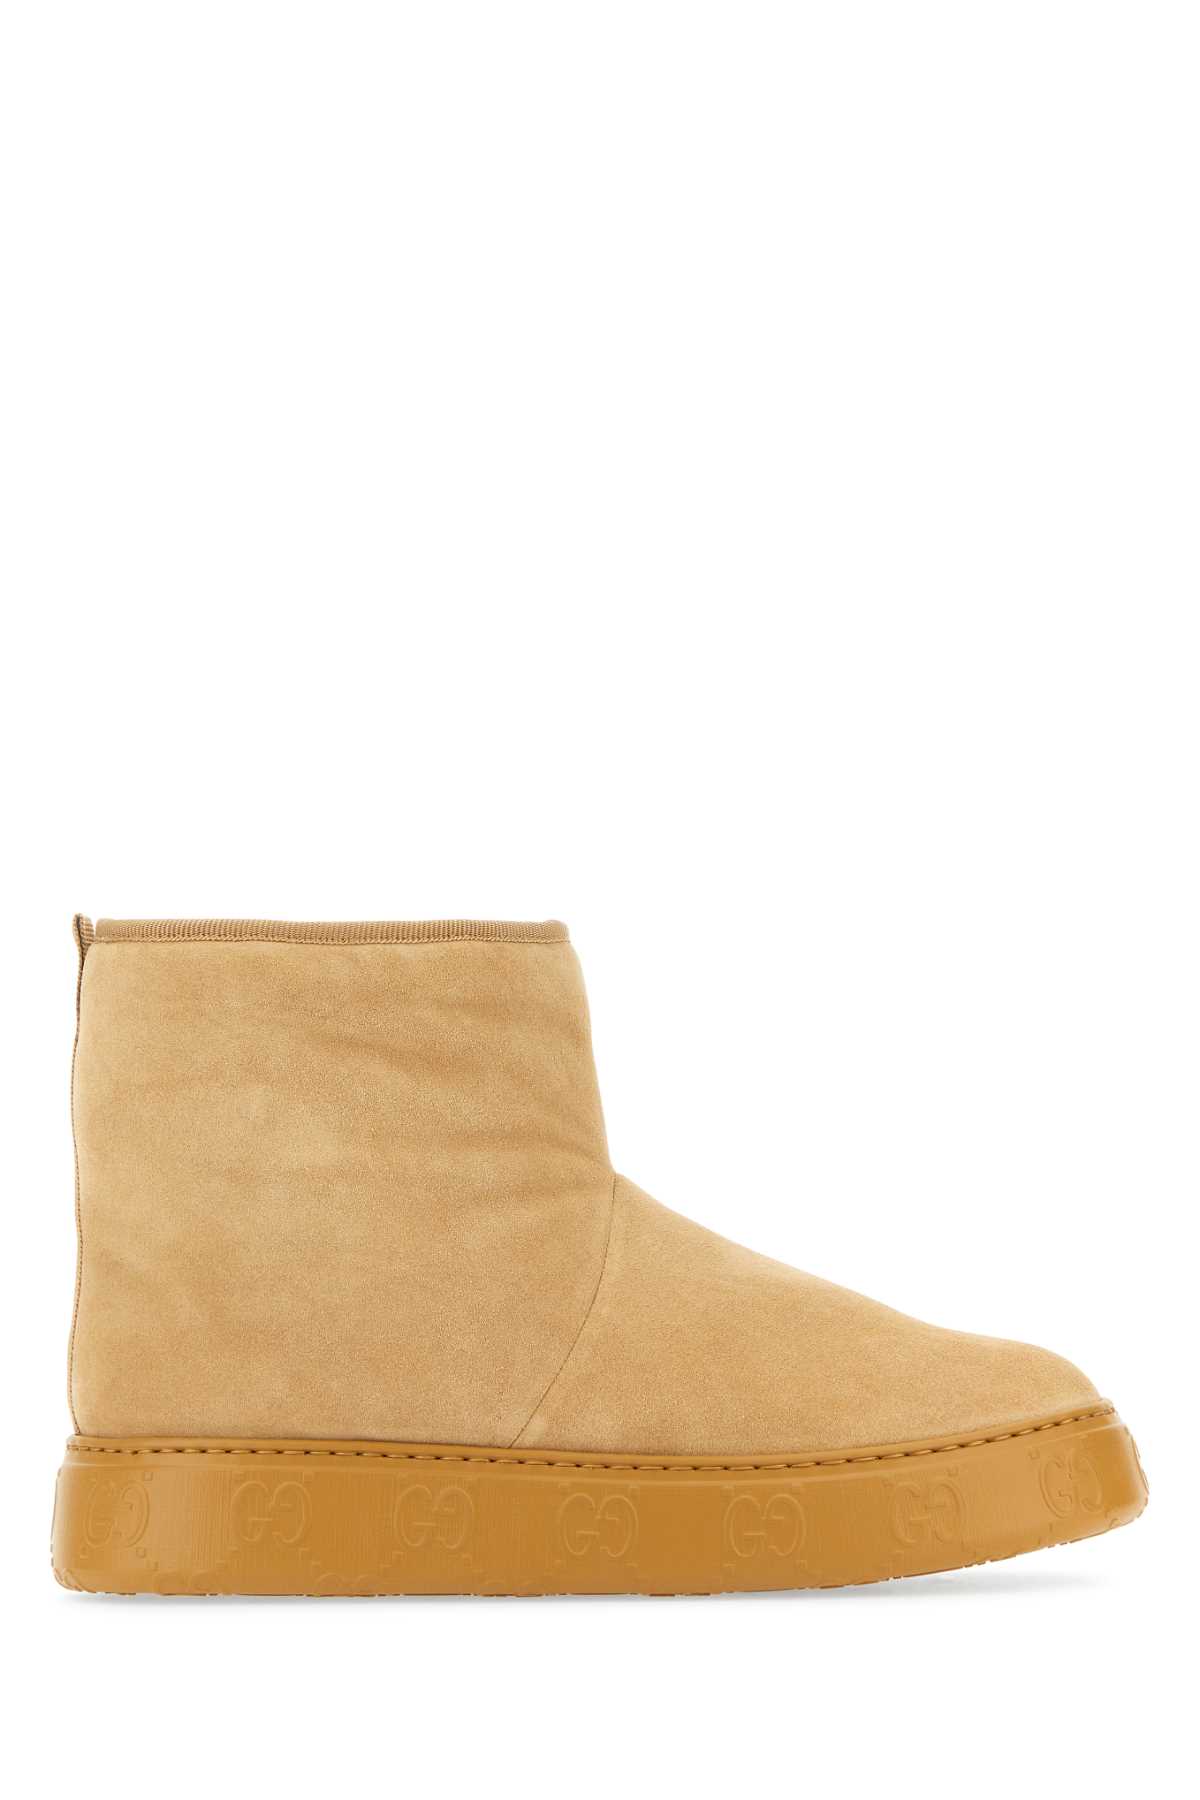 Gucci Beige Suede Ankle Boots